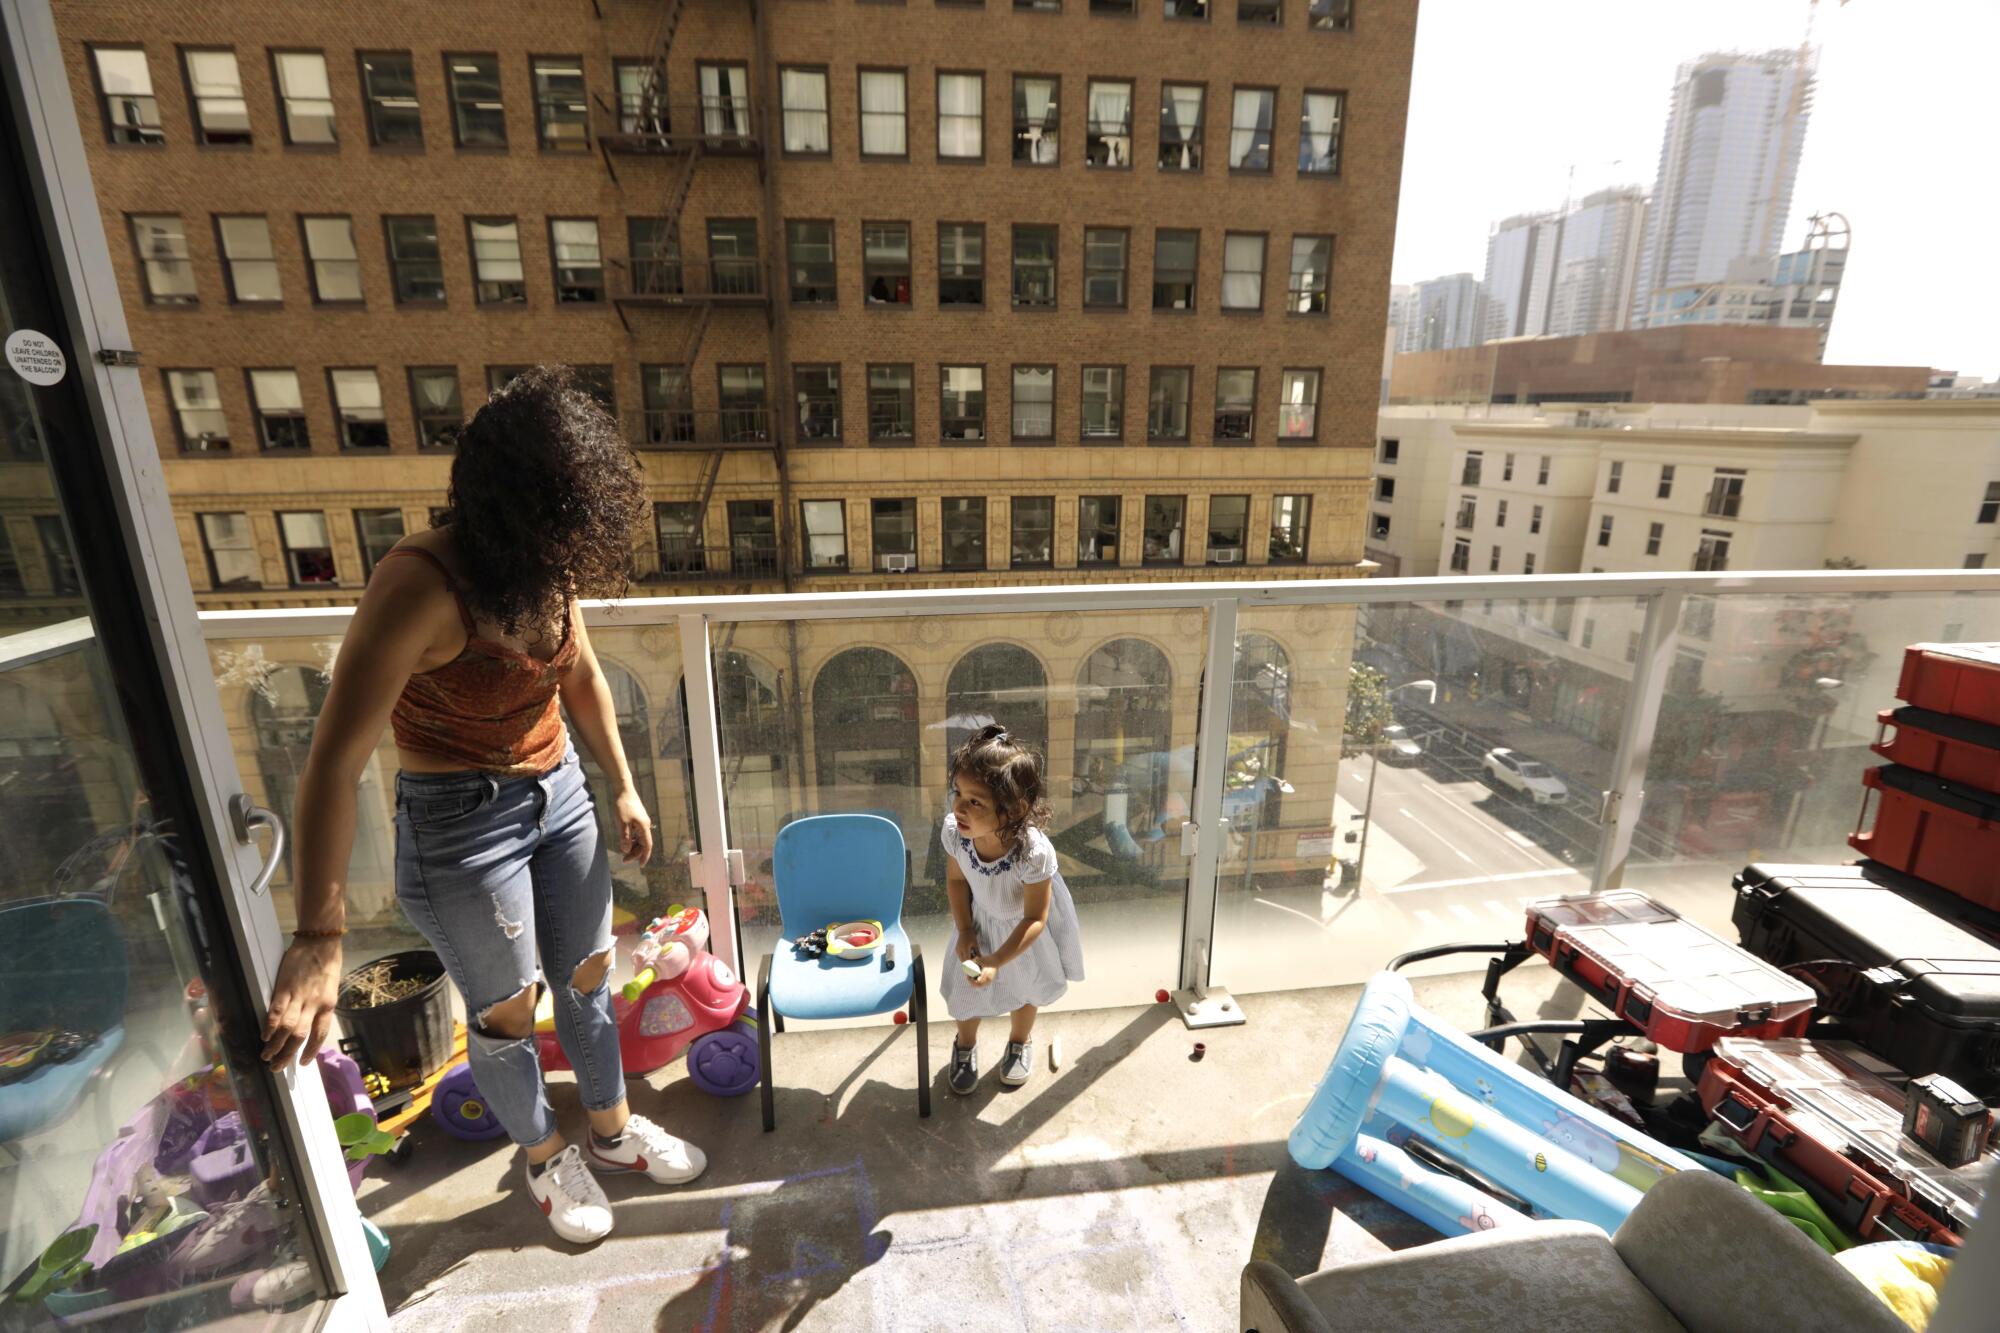 A woman watches a little girl play on a balcony